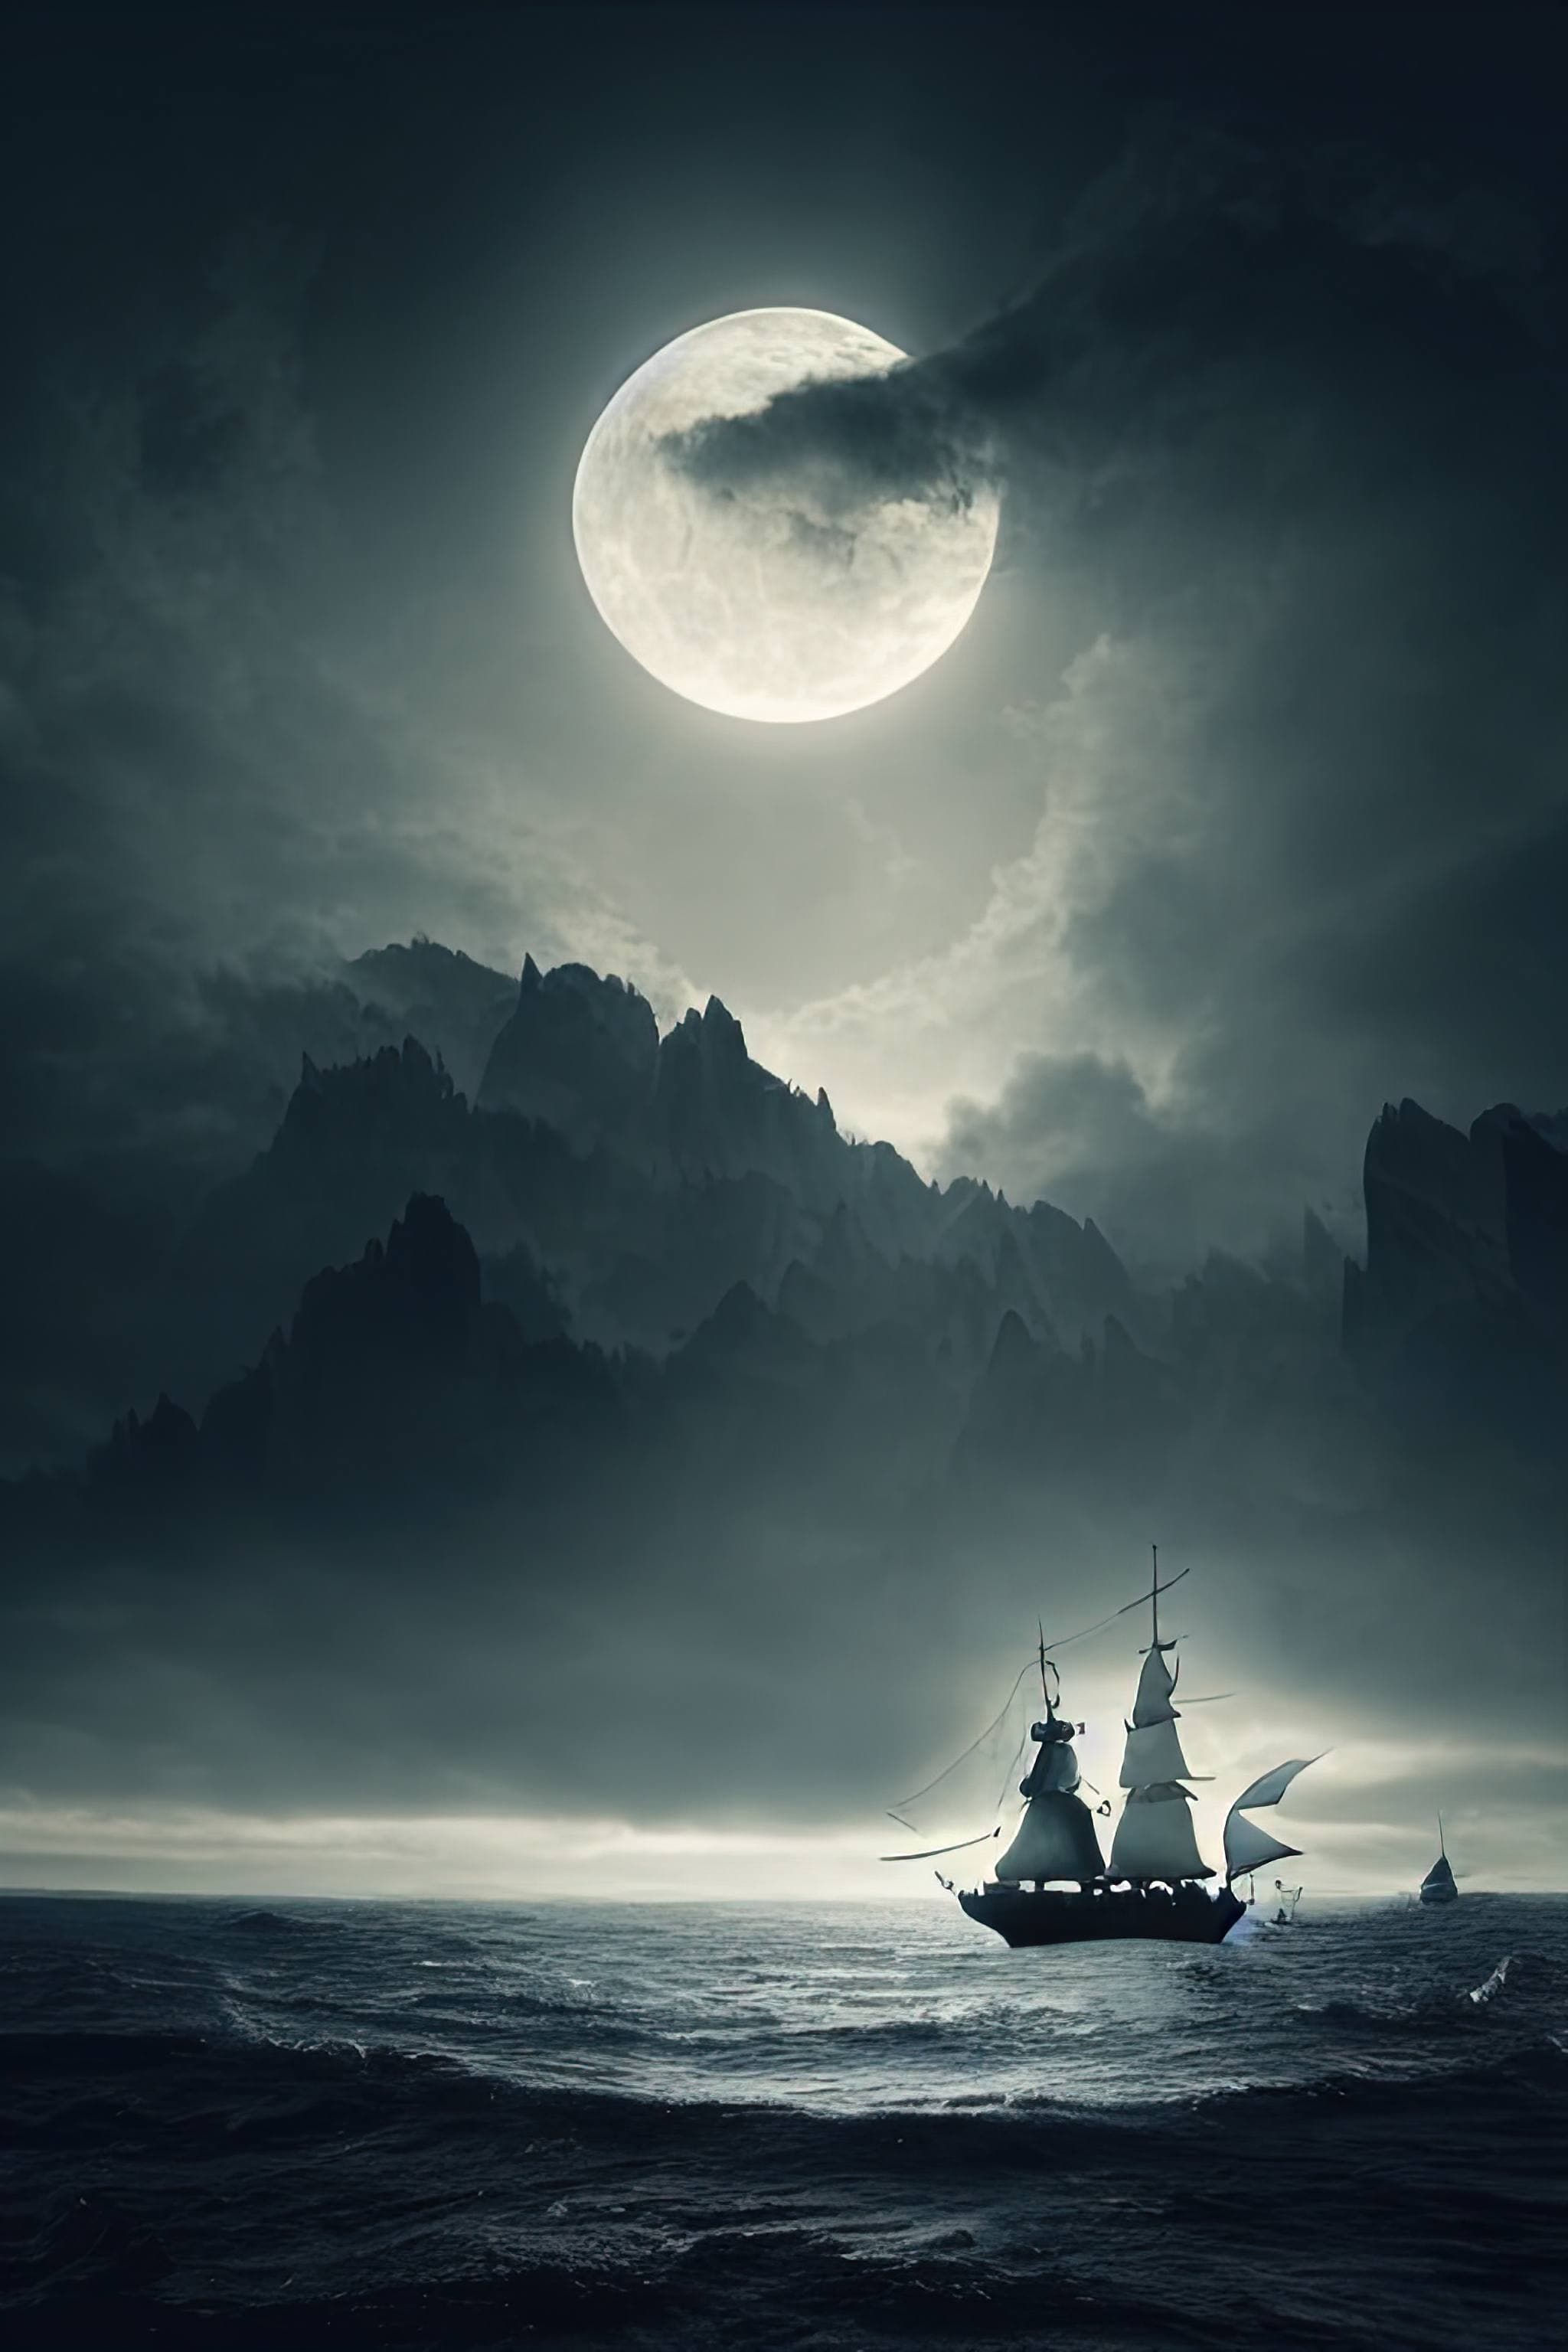 A ship sails on the ocean under a full moon - Pirate